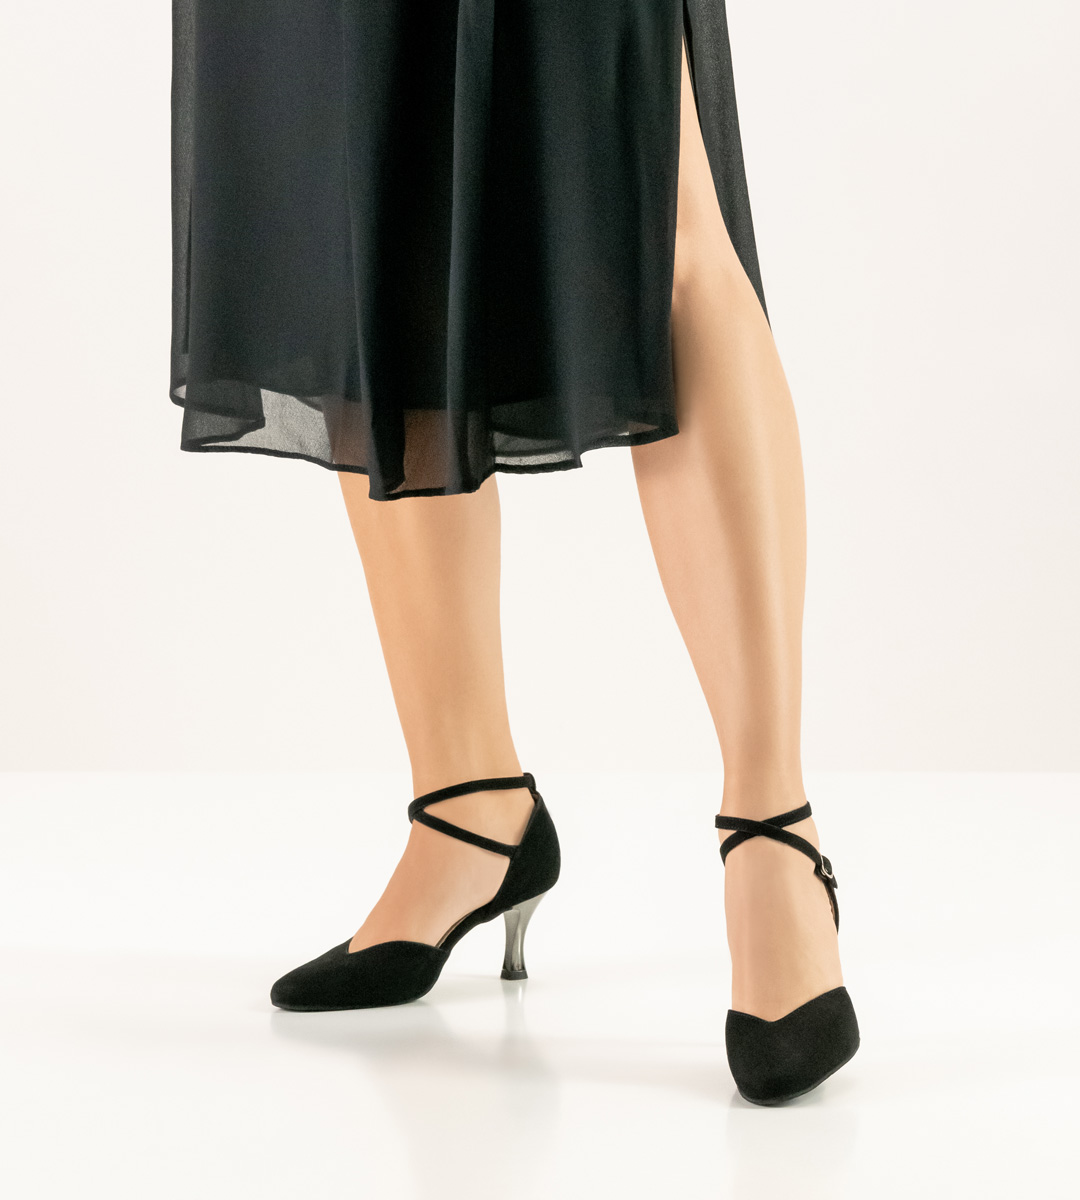 black skirt in combination with Werner Kern ladies' dance shoe and ankle strap